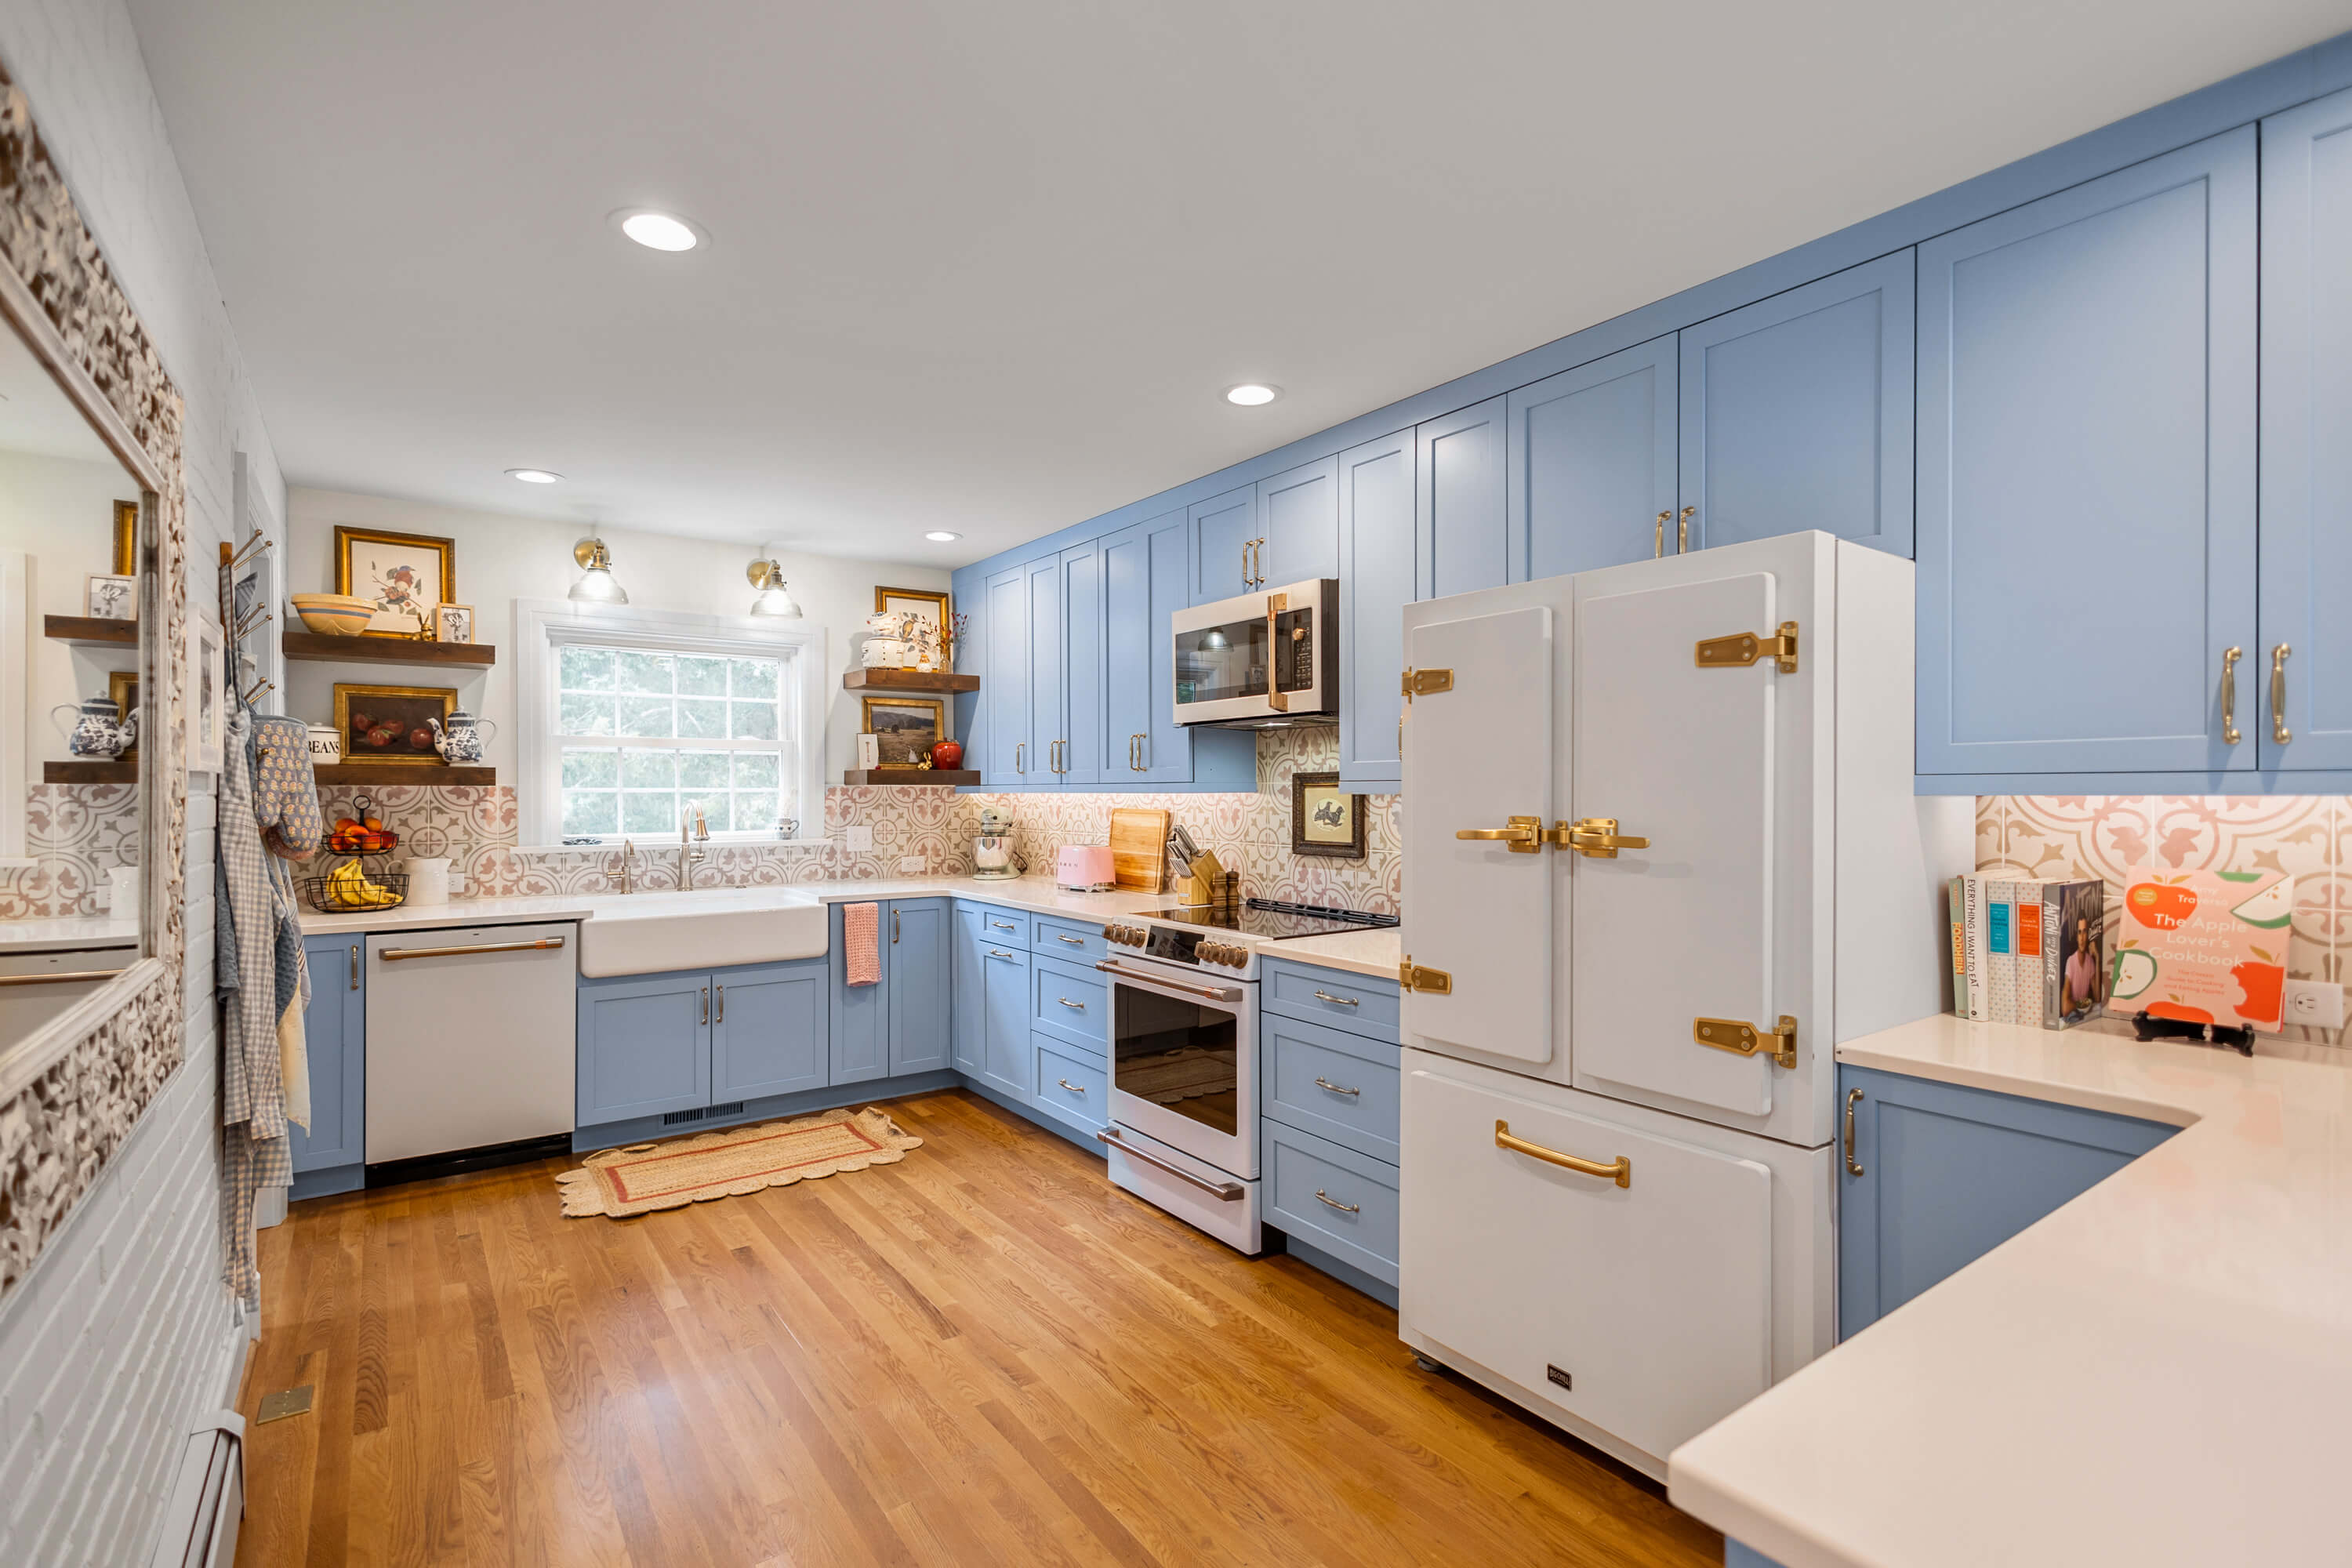 A soft baby blue kitchen remodel with vintage style and custom blue painted cabinets.